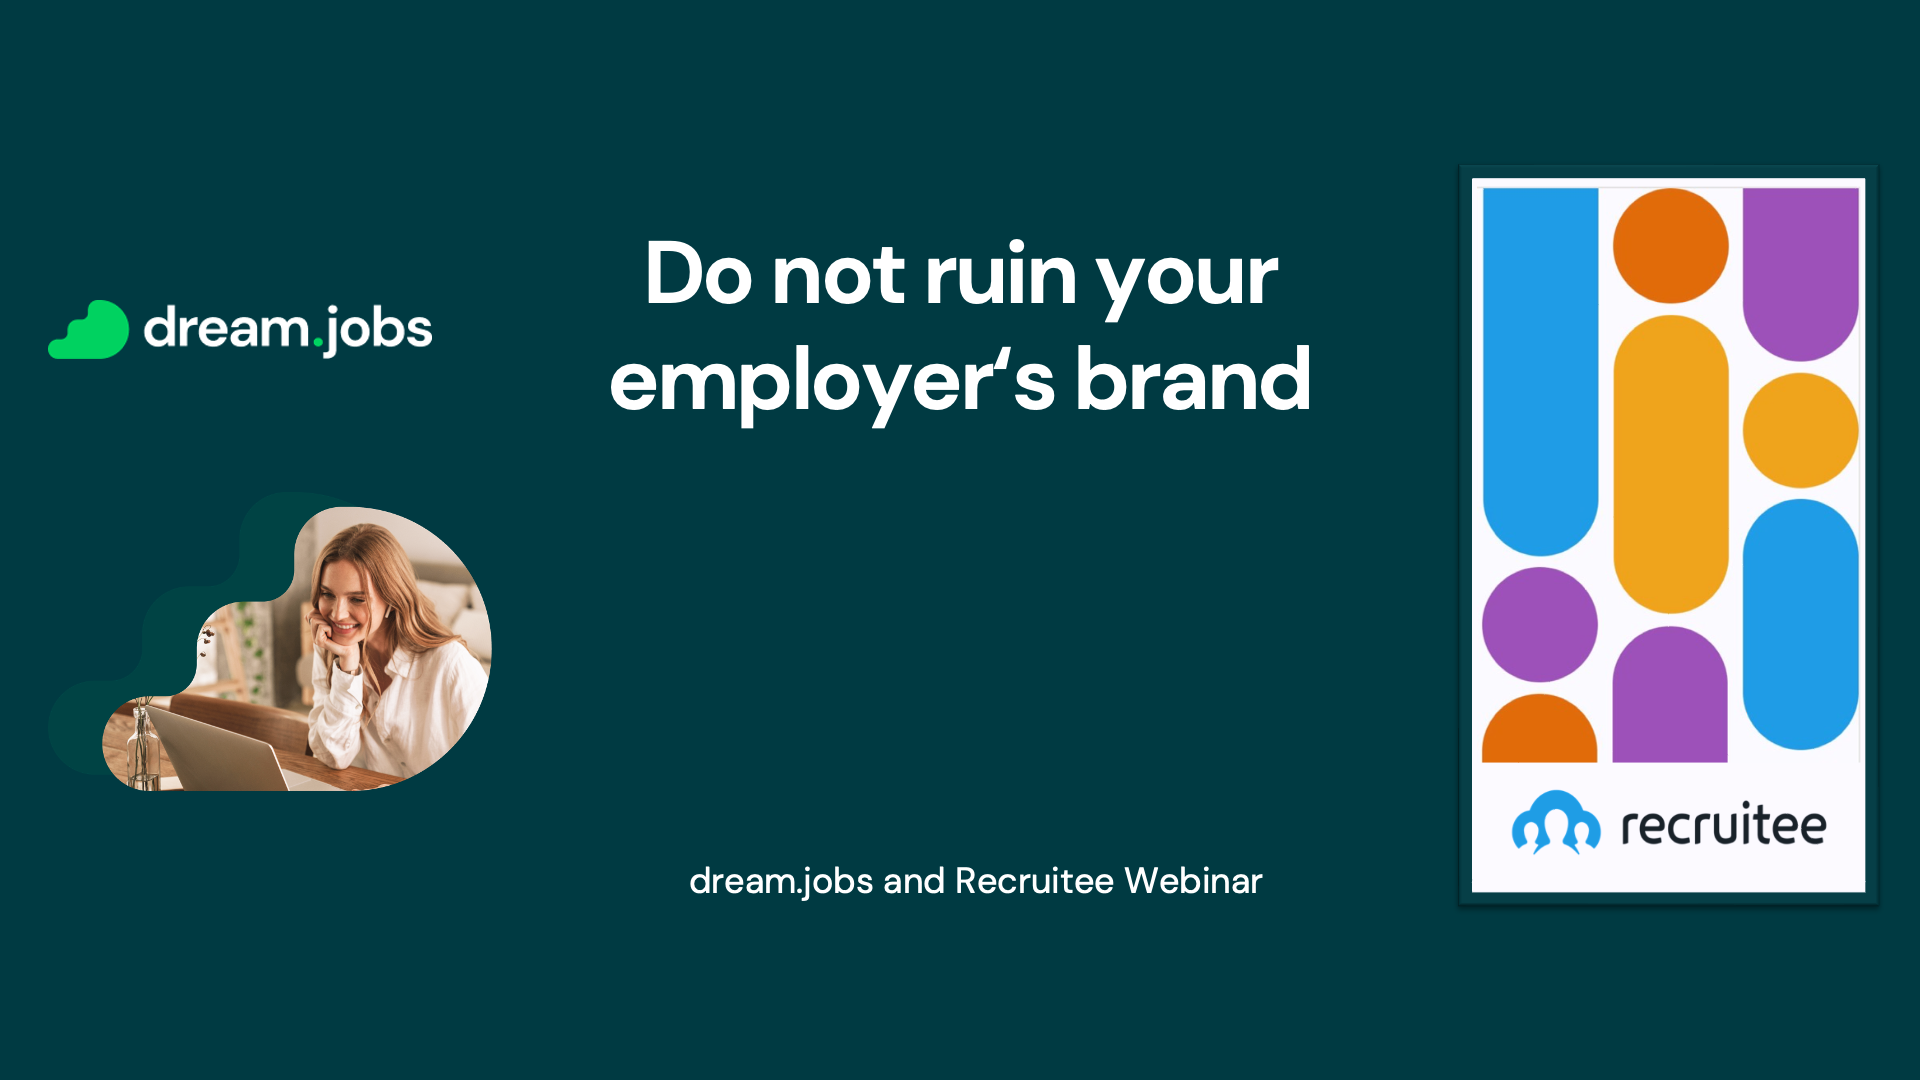 Don't Ruin Your Employer's Brand